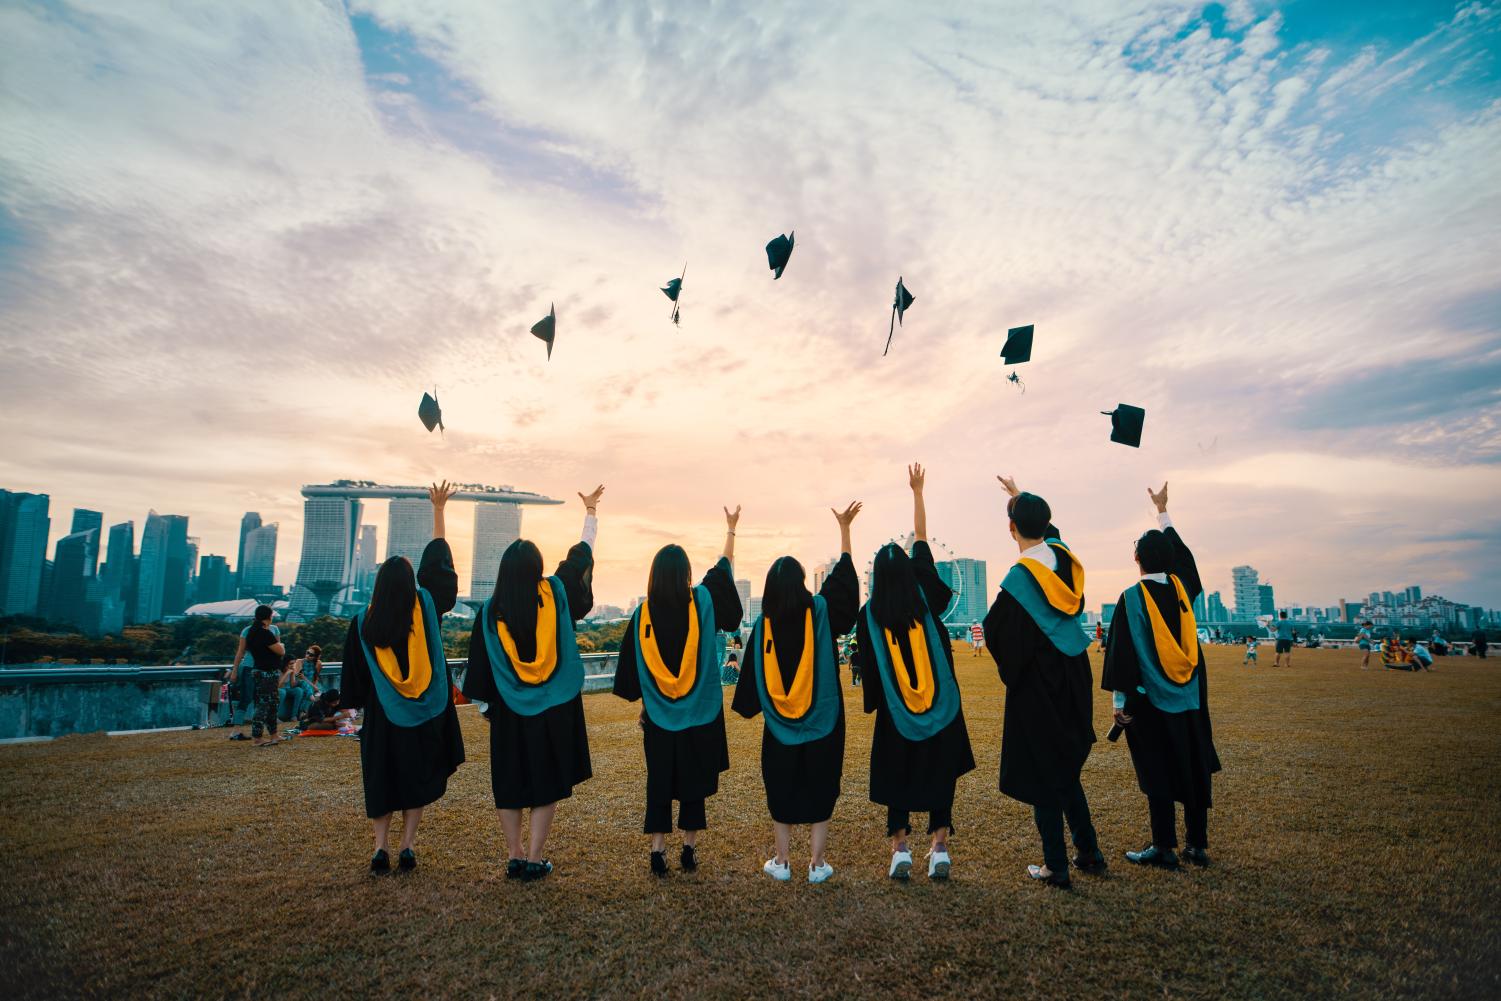 Graduates throw their caps in excitement! Photo by Pang Yuhao on Unsplash